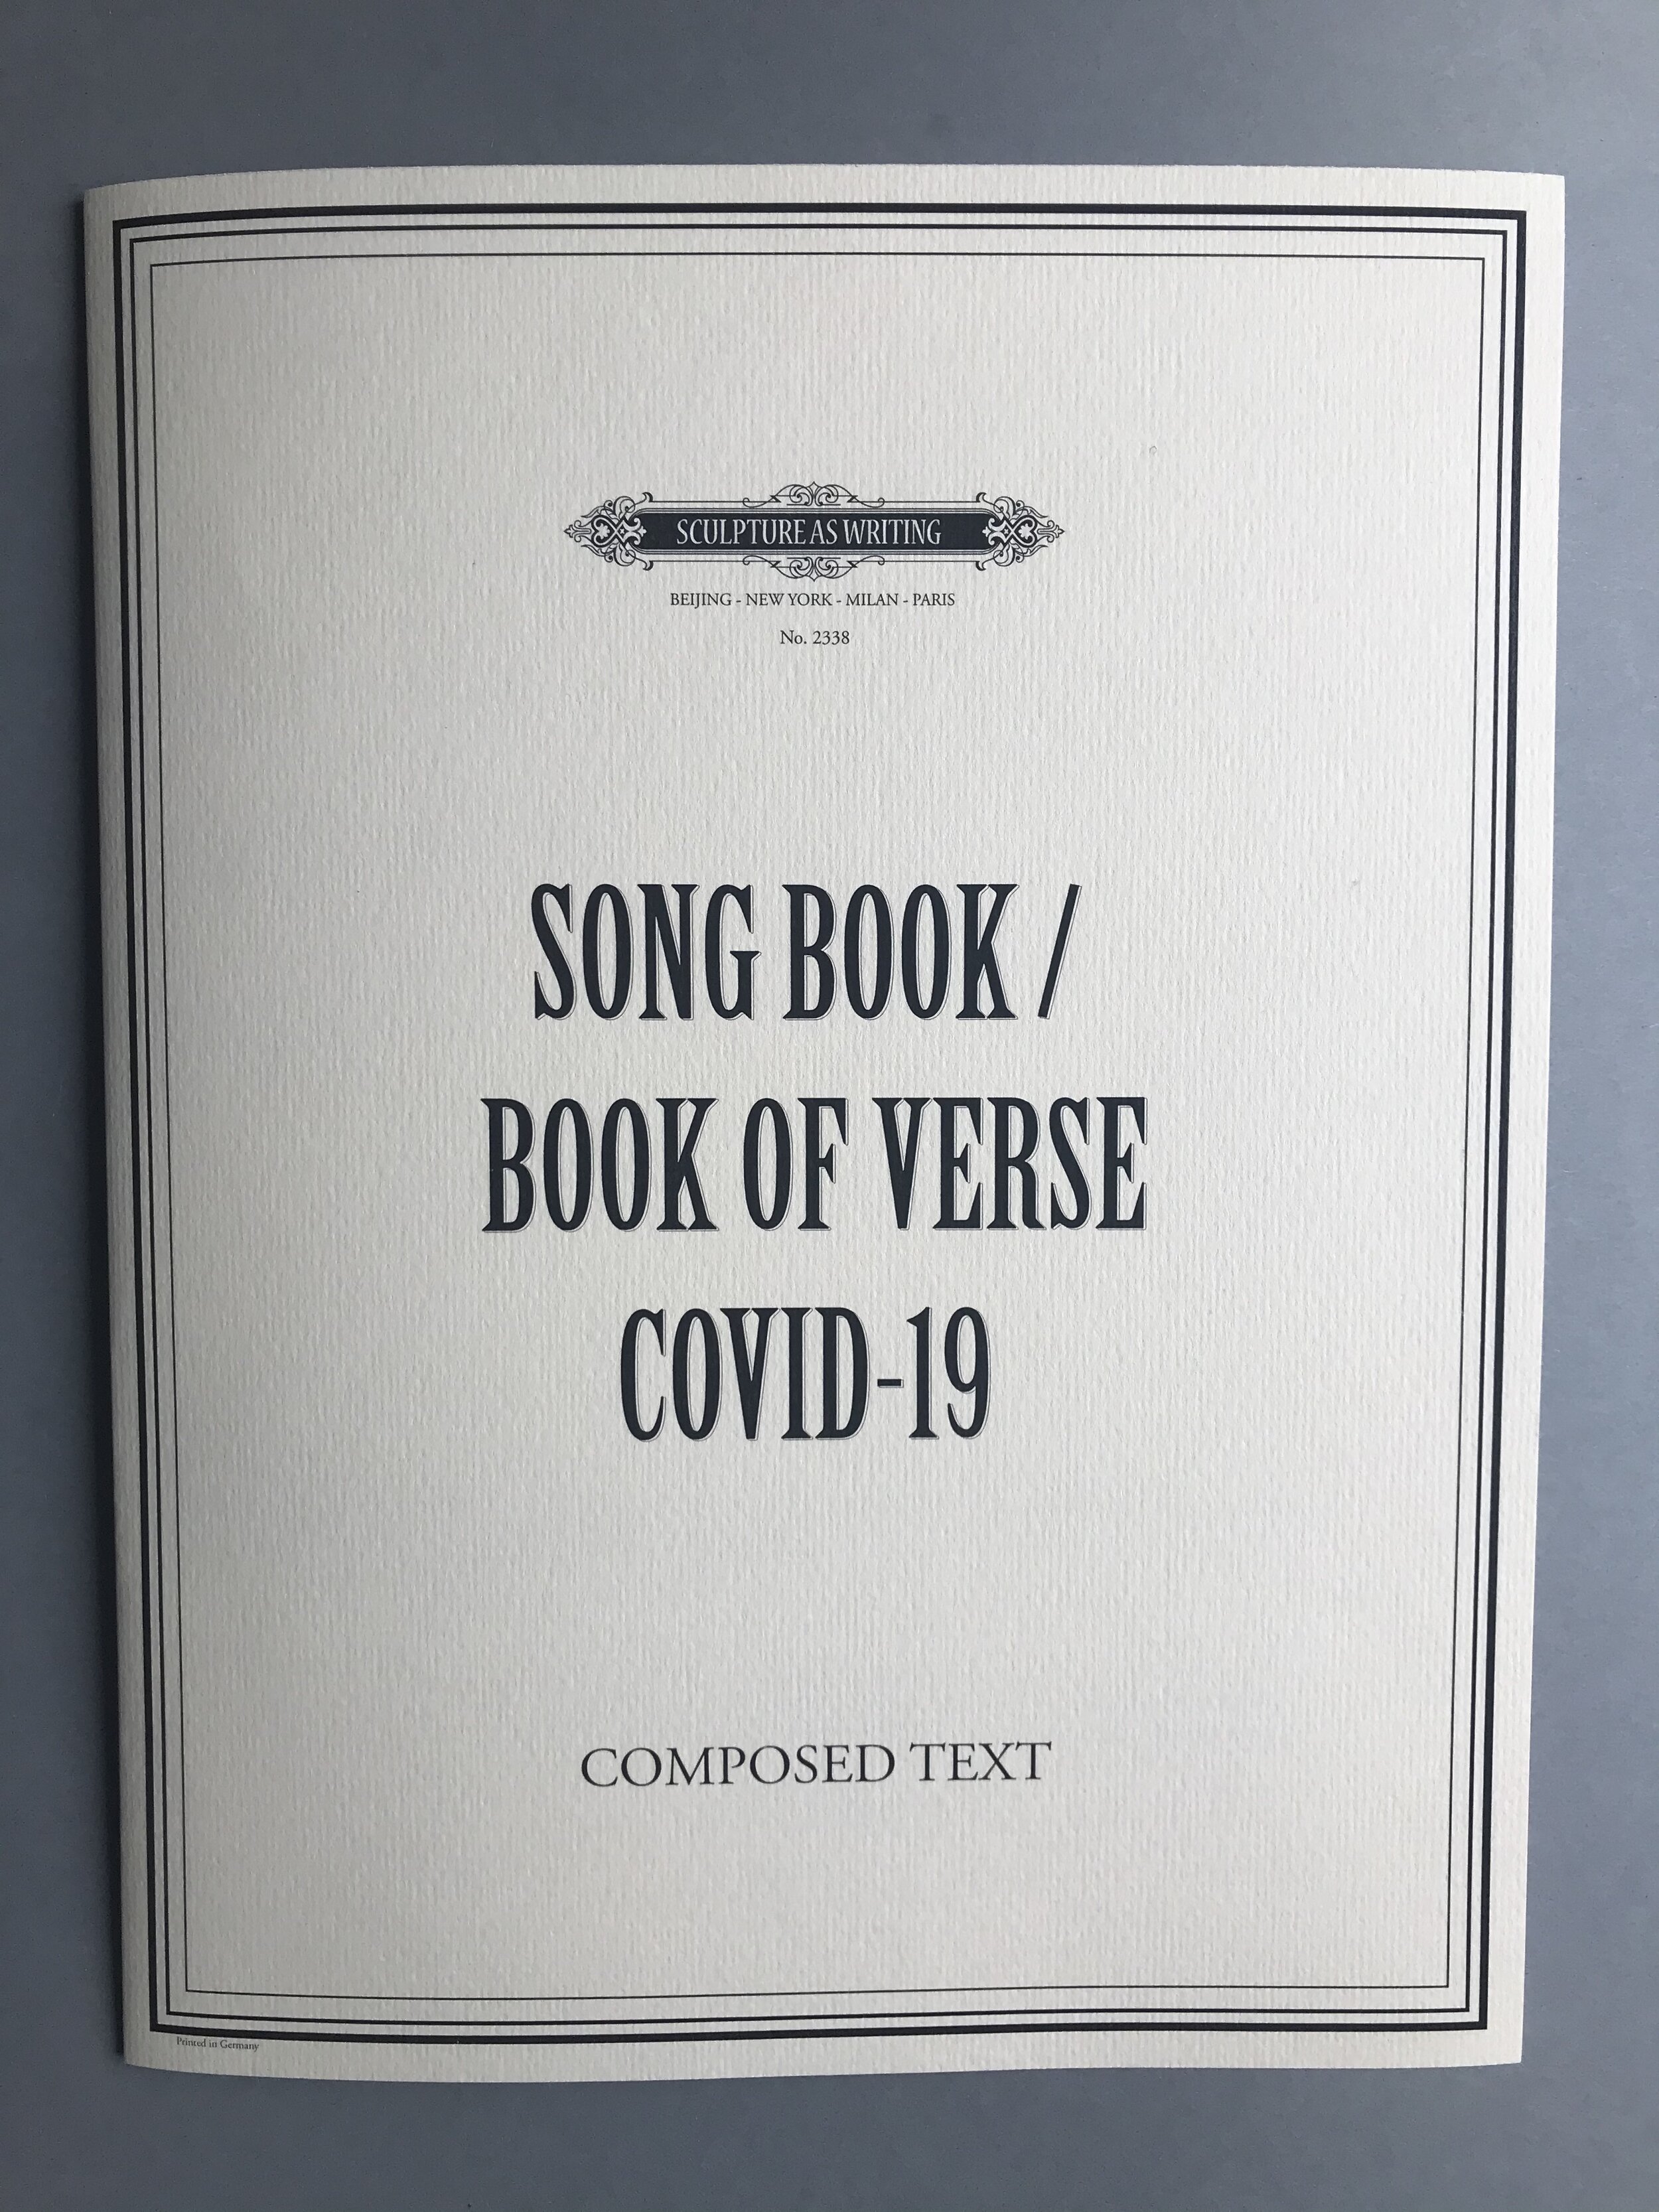 Kirsten Palz, Song Book, Book of Verse, Covid-19, 2020, Limited edition prints, Number of prints 100 pieces. Stamped and signed by the artist (Kopie)